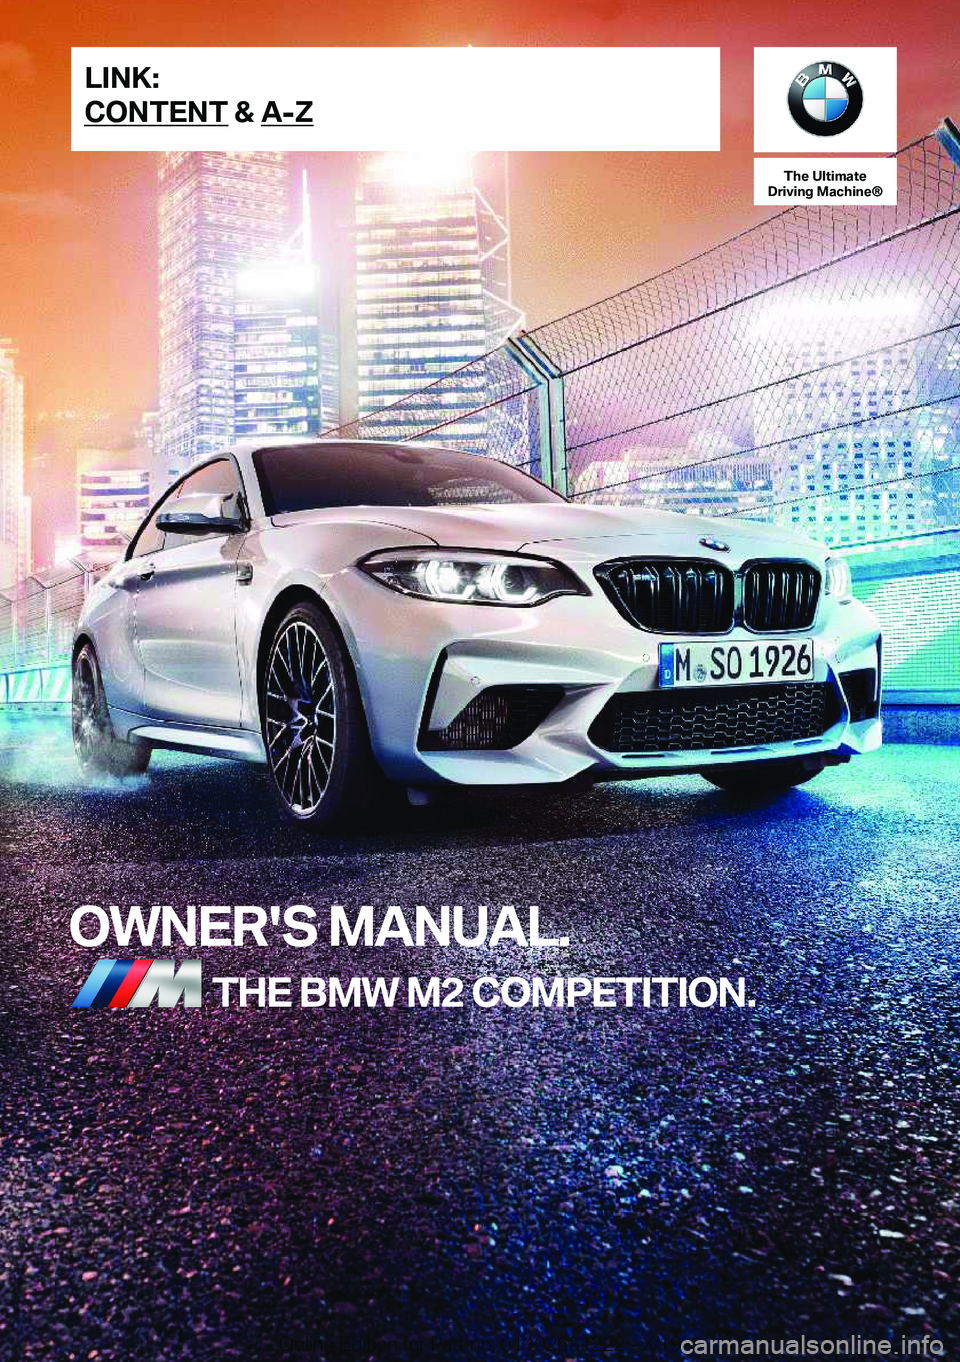 BMW M2 2020  Owners Manual �T�h�e��U�l�t�i�m�a�t�e
�D�r�i�v�i�n�g��M�a�c�h�i�n�e�n
�O�W�N�E�R�'�S��M�A�N�U�A�L�.�T�H�E��B�M�W��M�2��C�O�M�P�E�T�I�T�I�O�N�.�L�I�N�K�:
�C�O�N�T�E�N�T��&��A�-�Z�O�n�l�i�n�e��E�d�i�t�i�